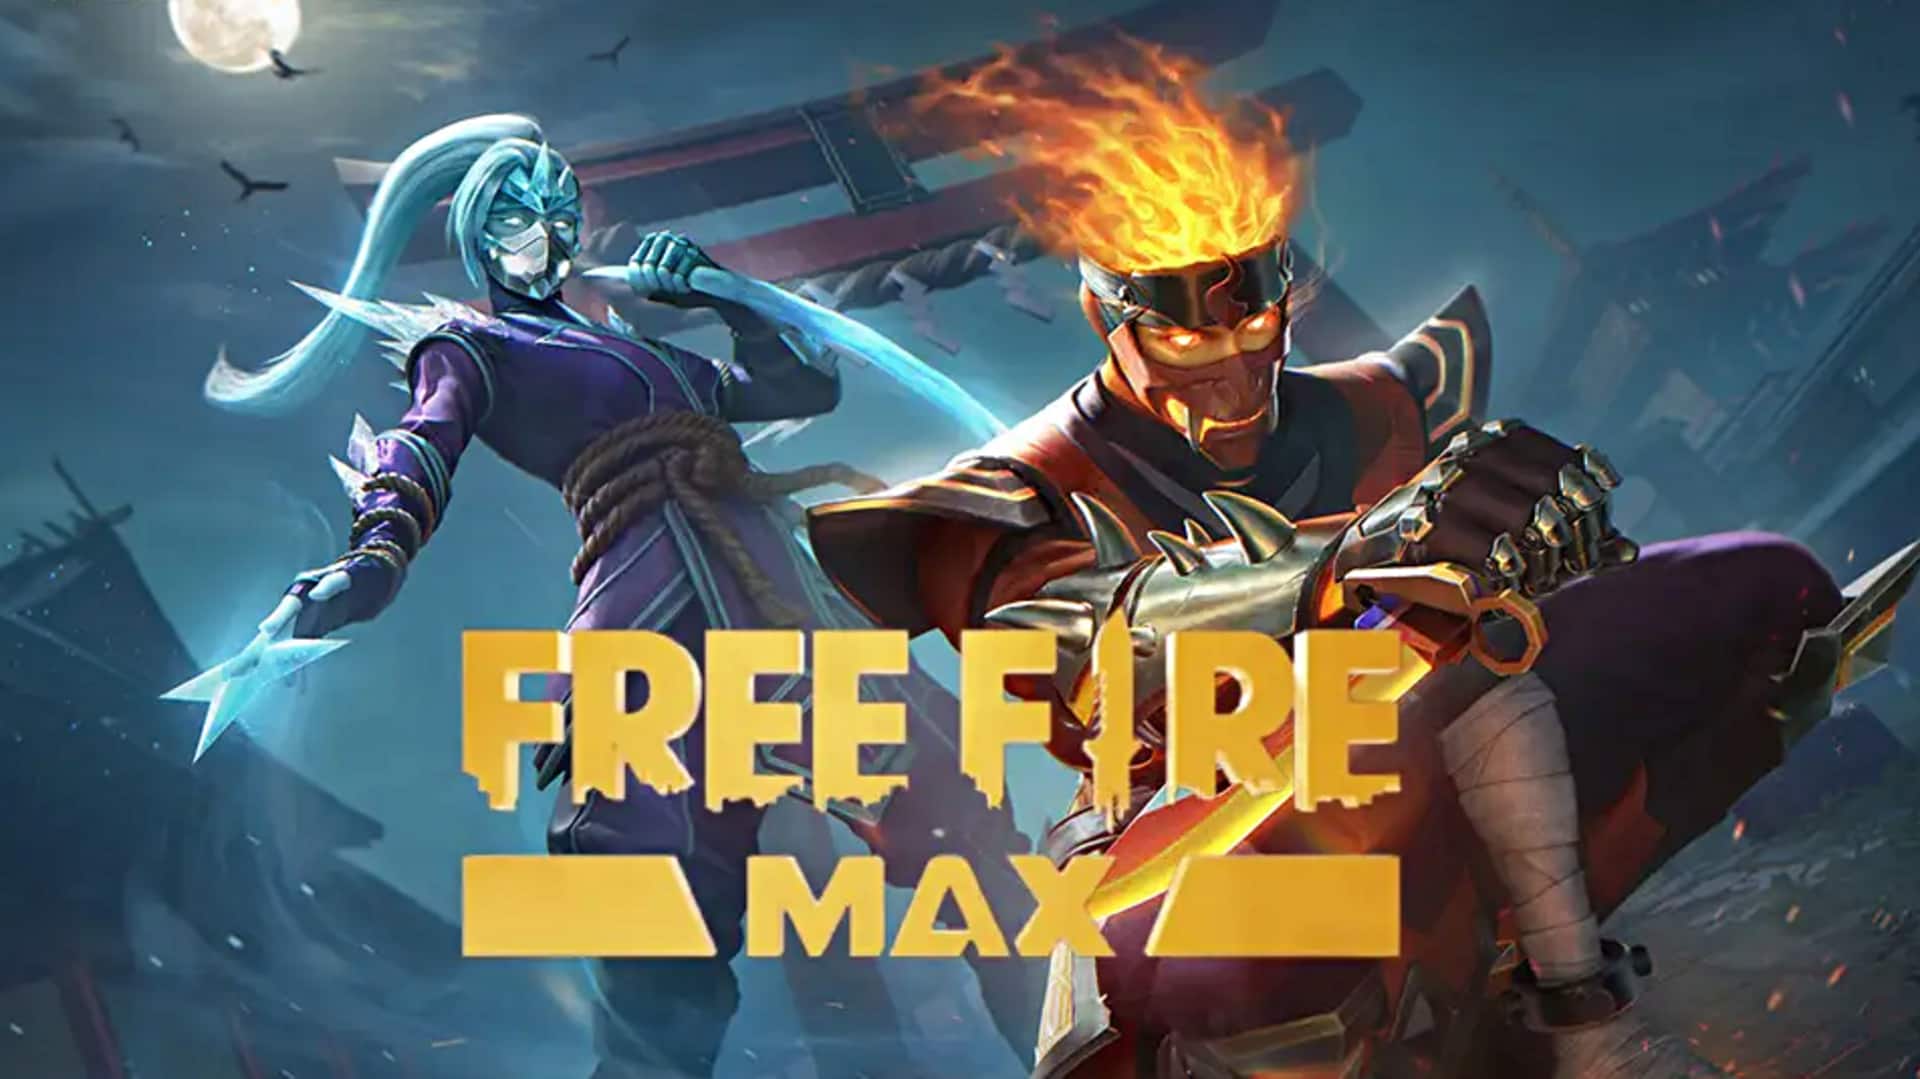 Garena Free Fire MAX codes for December 2: Redeem now